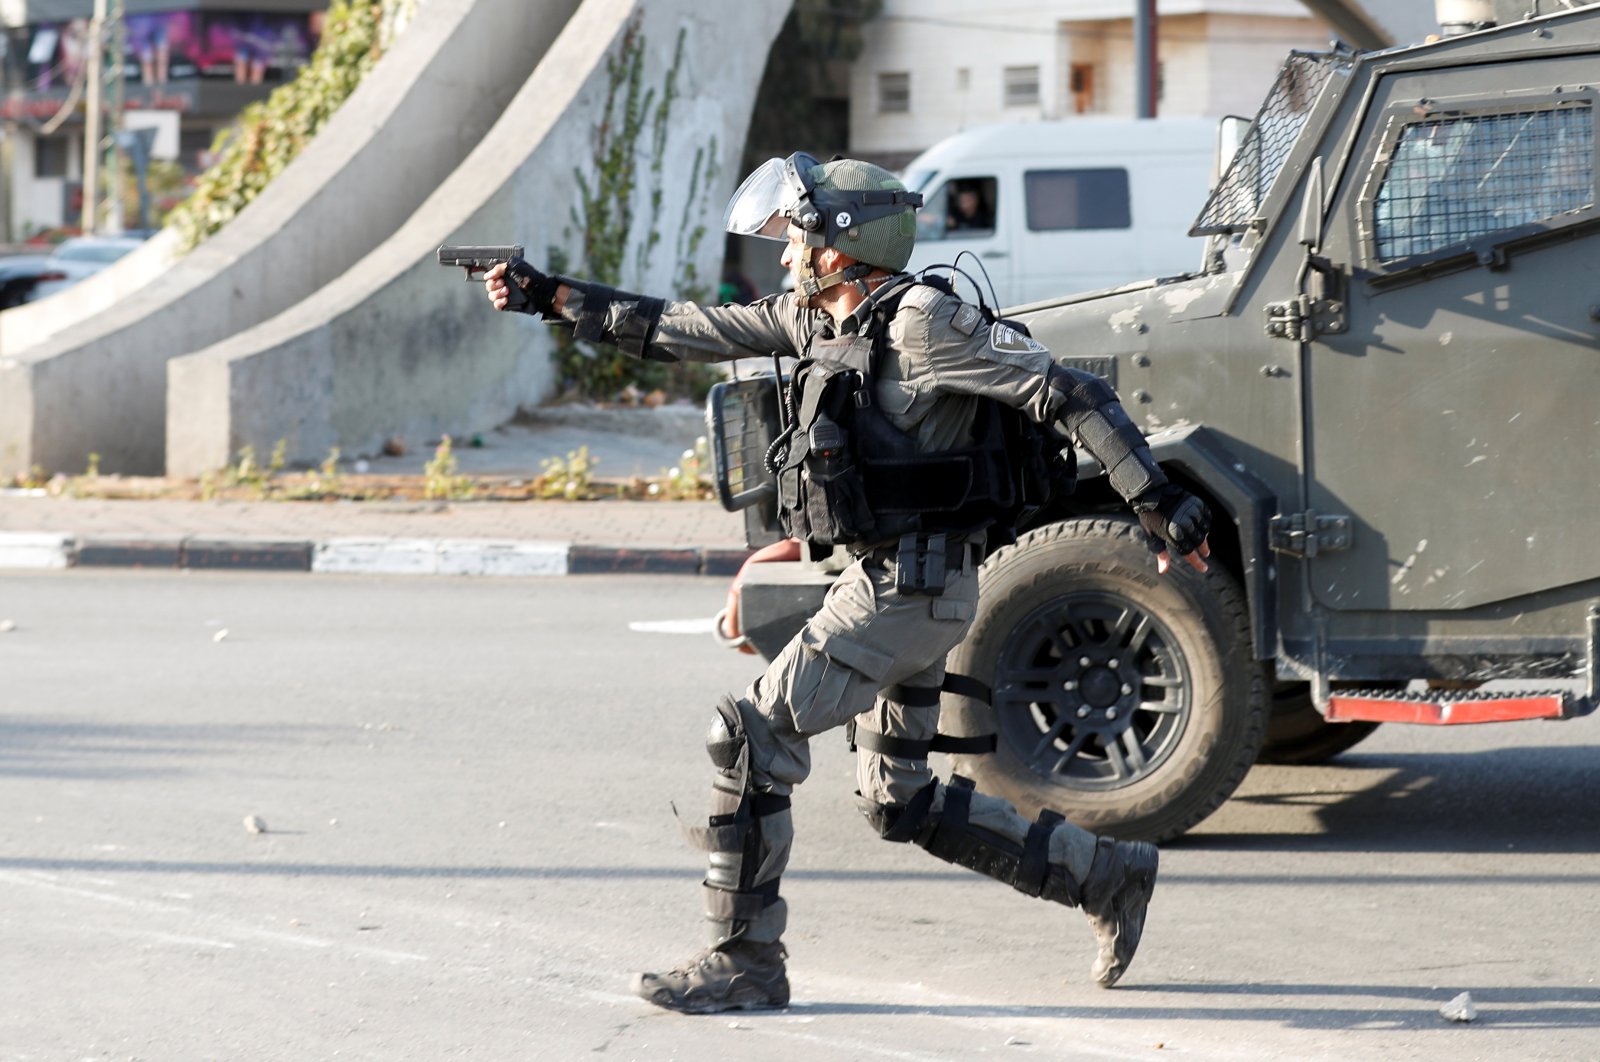 A member of the Israeli forces aims with a gun during a protest near the Jewish settlement of Beit El, near Ramallah, in the Israeli-occupied West Bank, Nov. 11, 2021. (Reuters Photo)